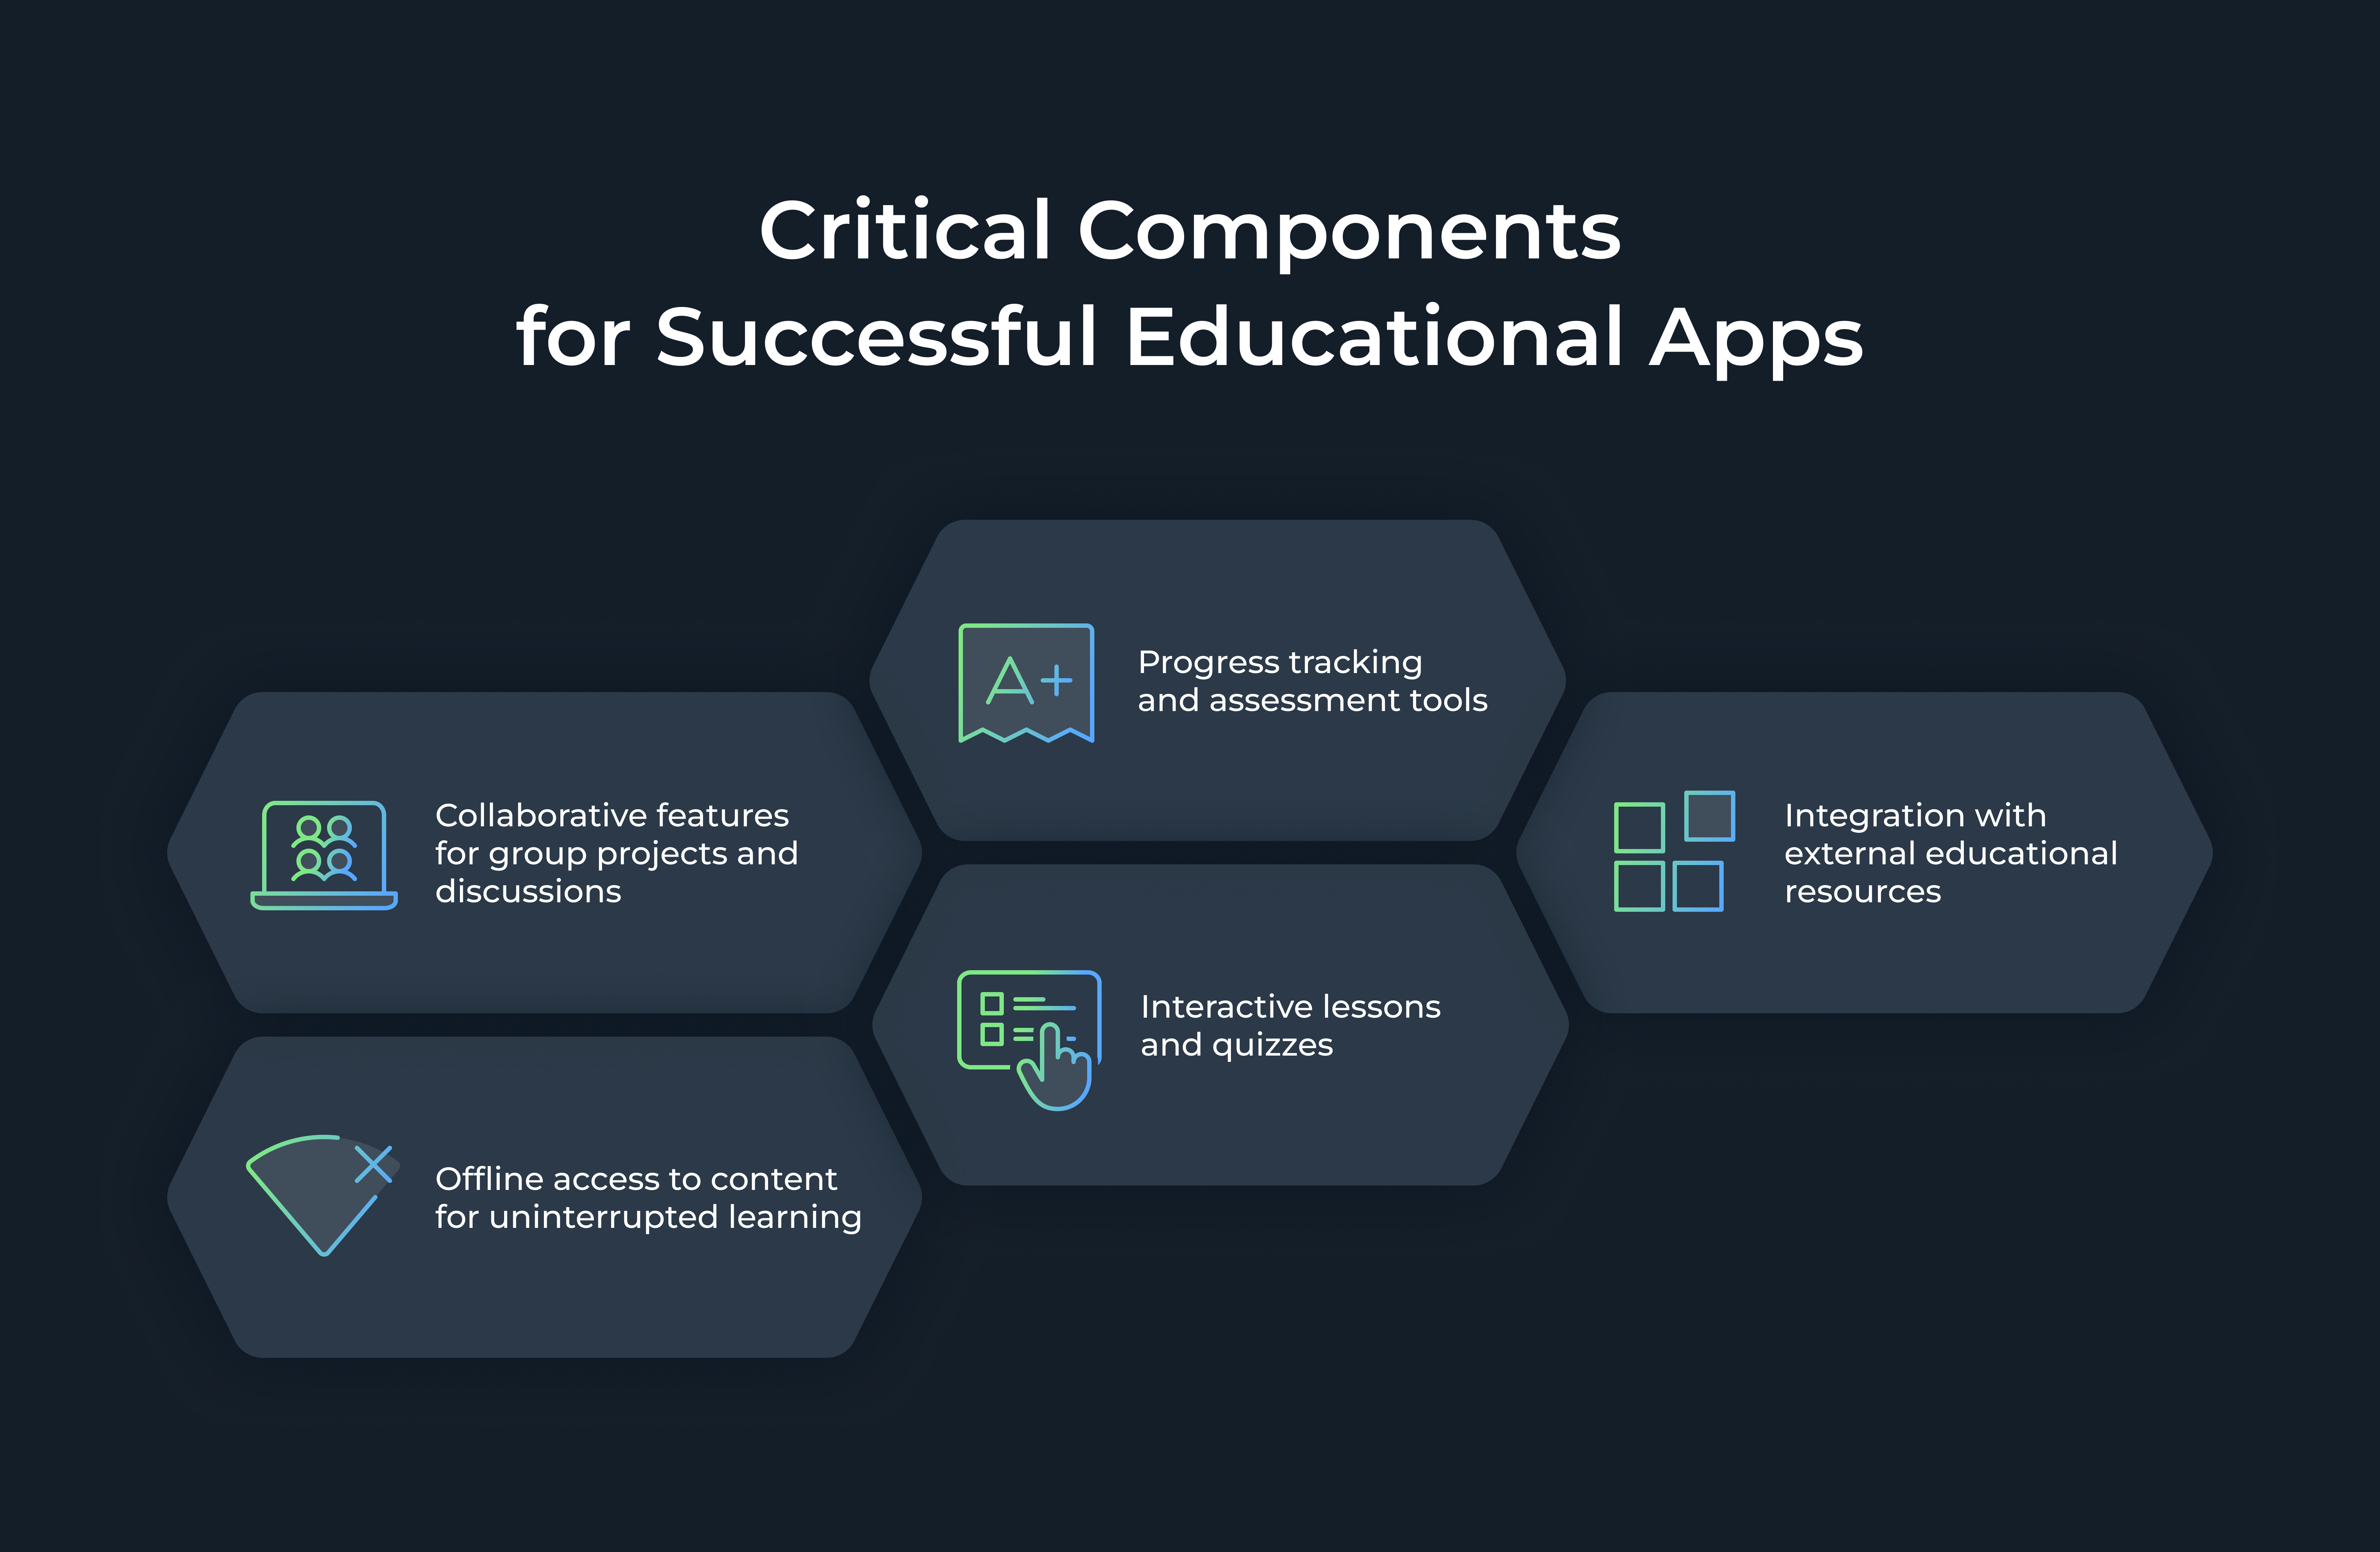 Critical Components for Successful Educational Apps: Interactive lessons and quizzes, Progress tracking and assessment tools, Integration with external educational resources, Collaborative features for group projects and discussions, Offline access to content for uninterrupted learning
